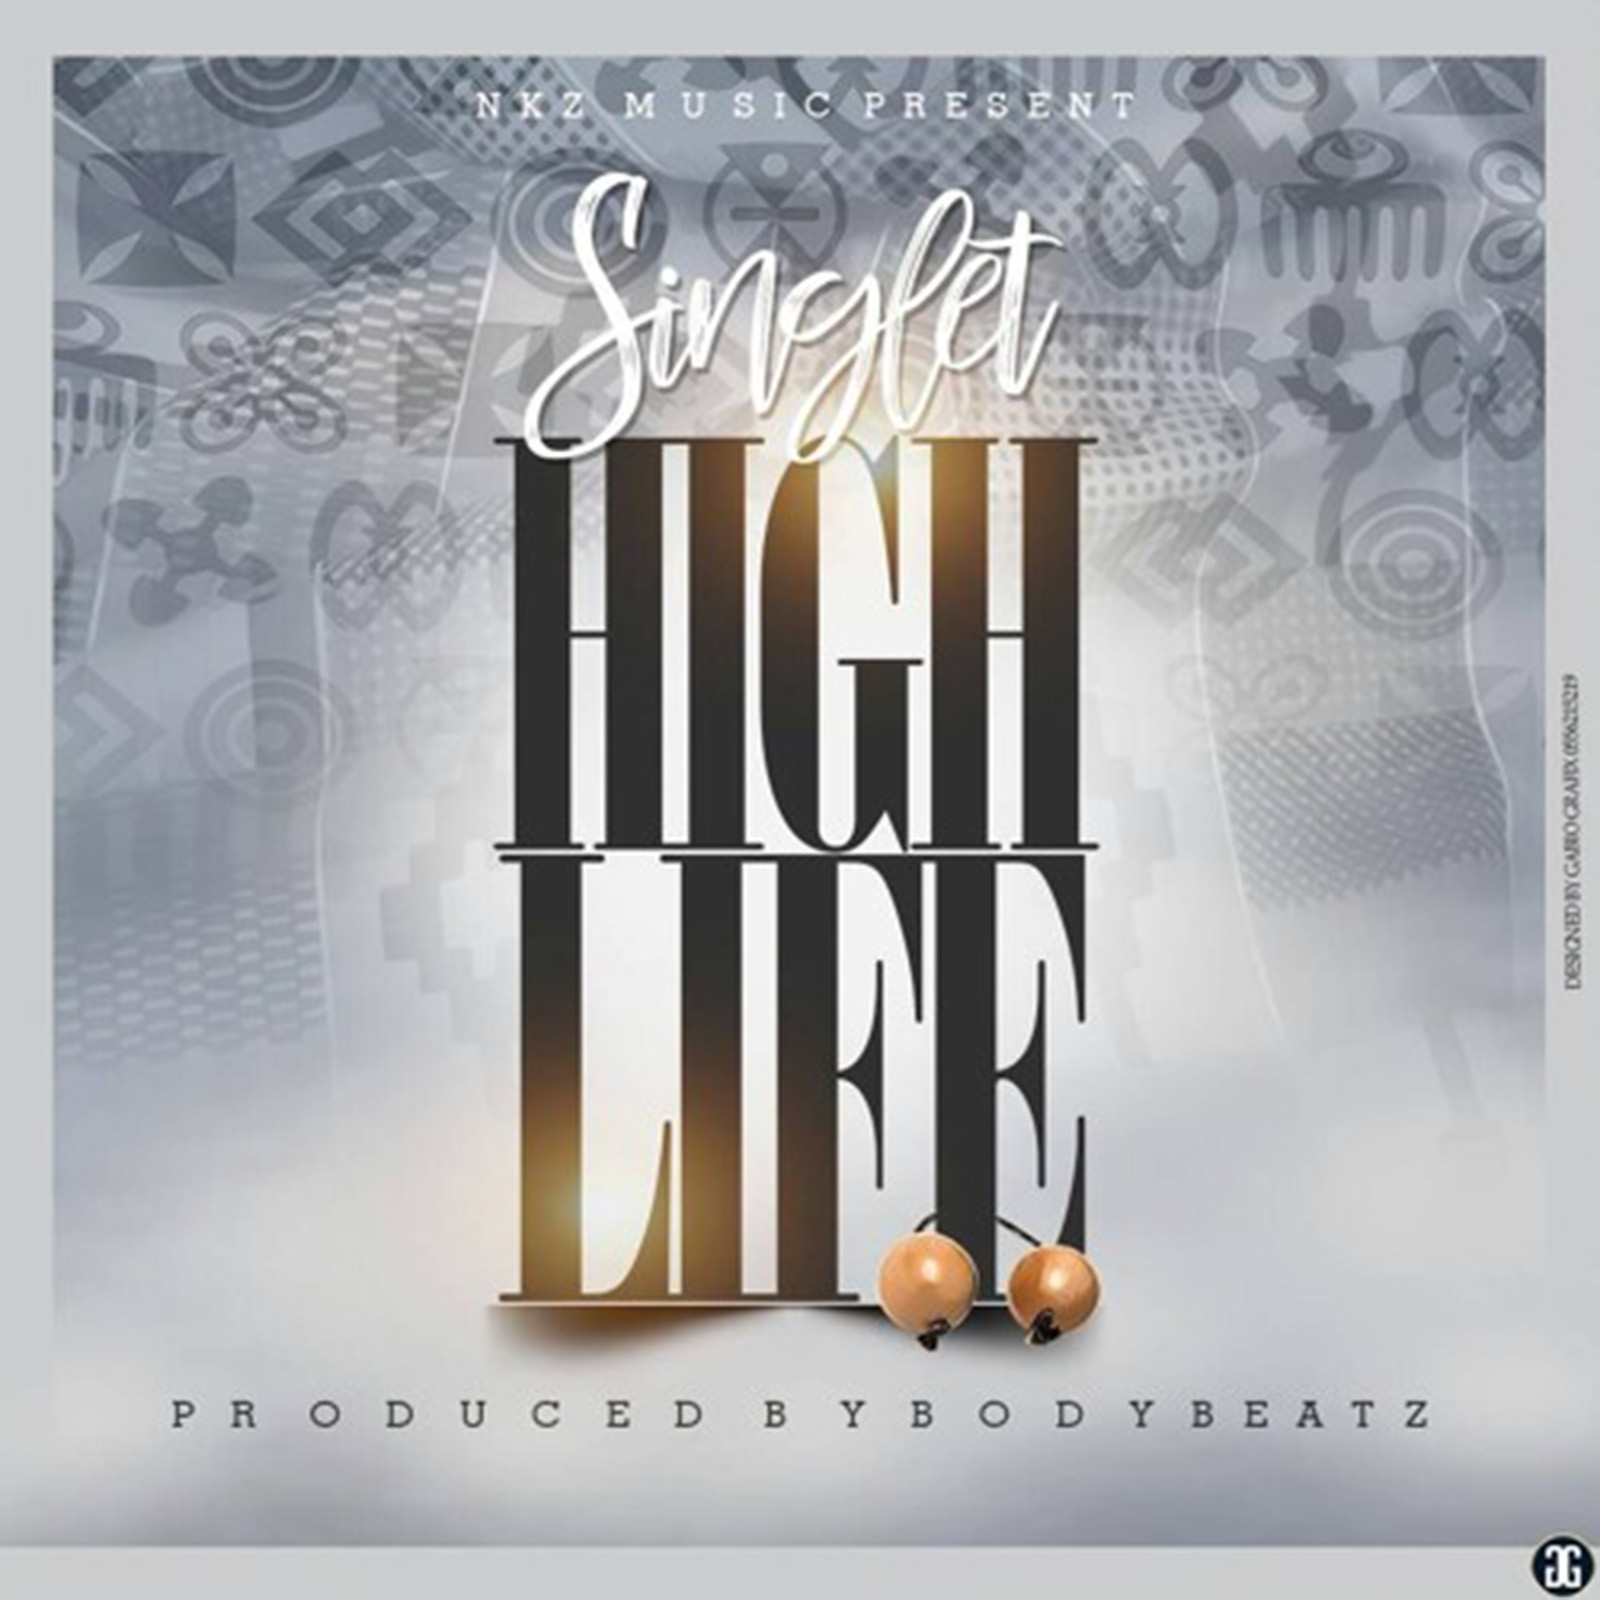 High Life by Singlet